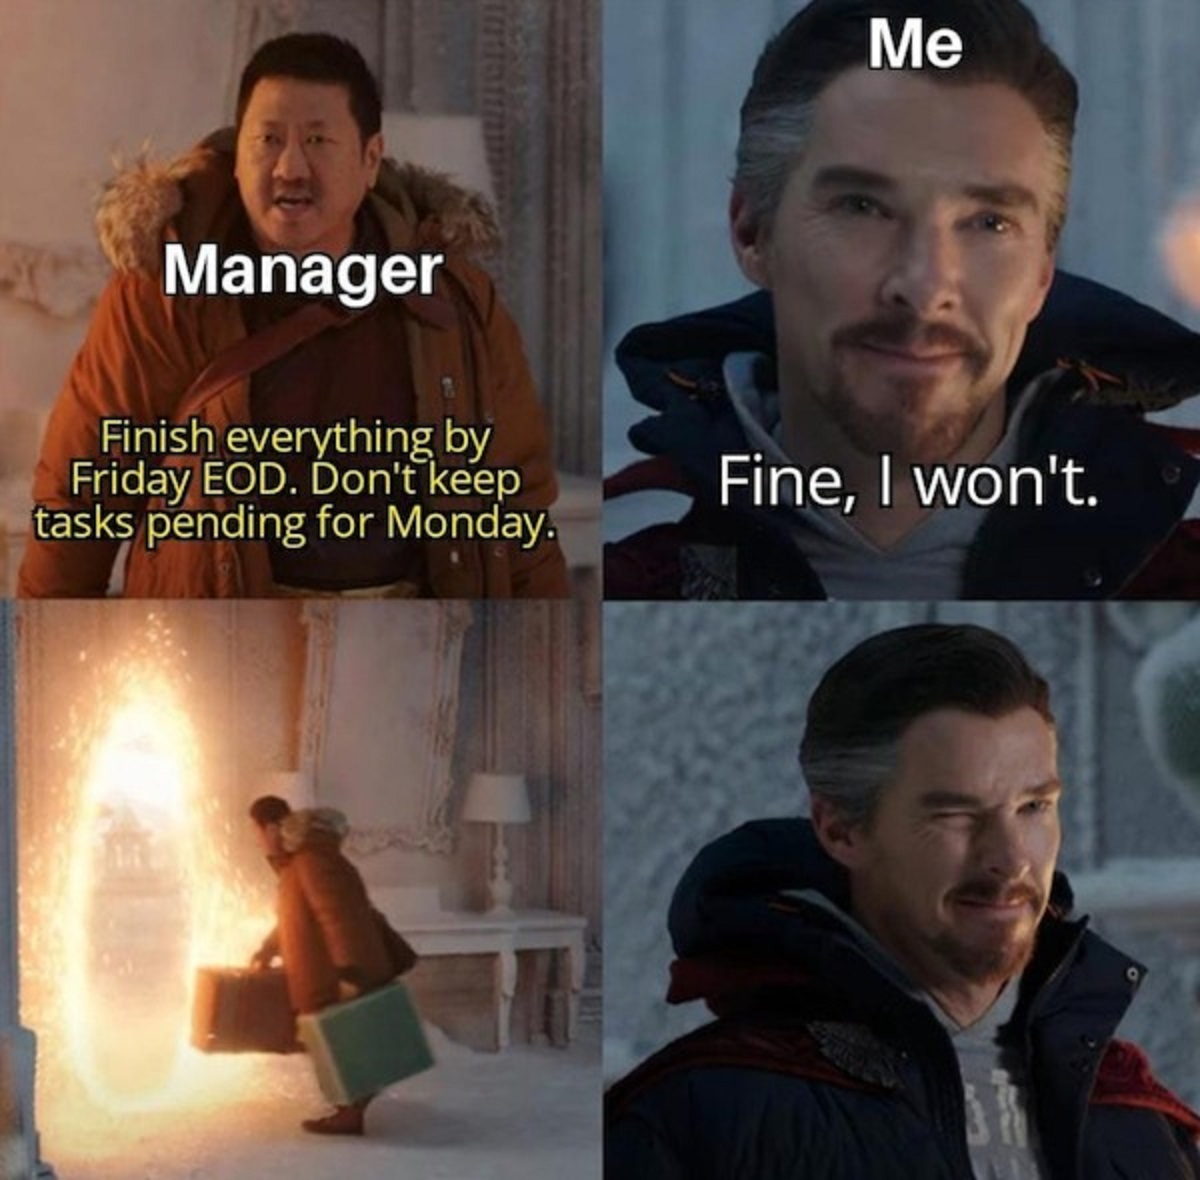 nwh memes - Me Manager Finish everything by Friday Eod. Don't keep tasks pending for Monday. Fine, I won't.